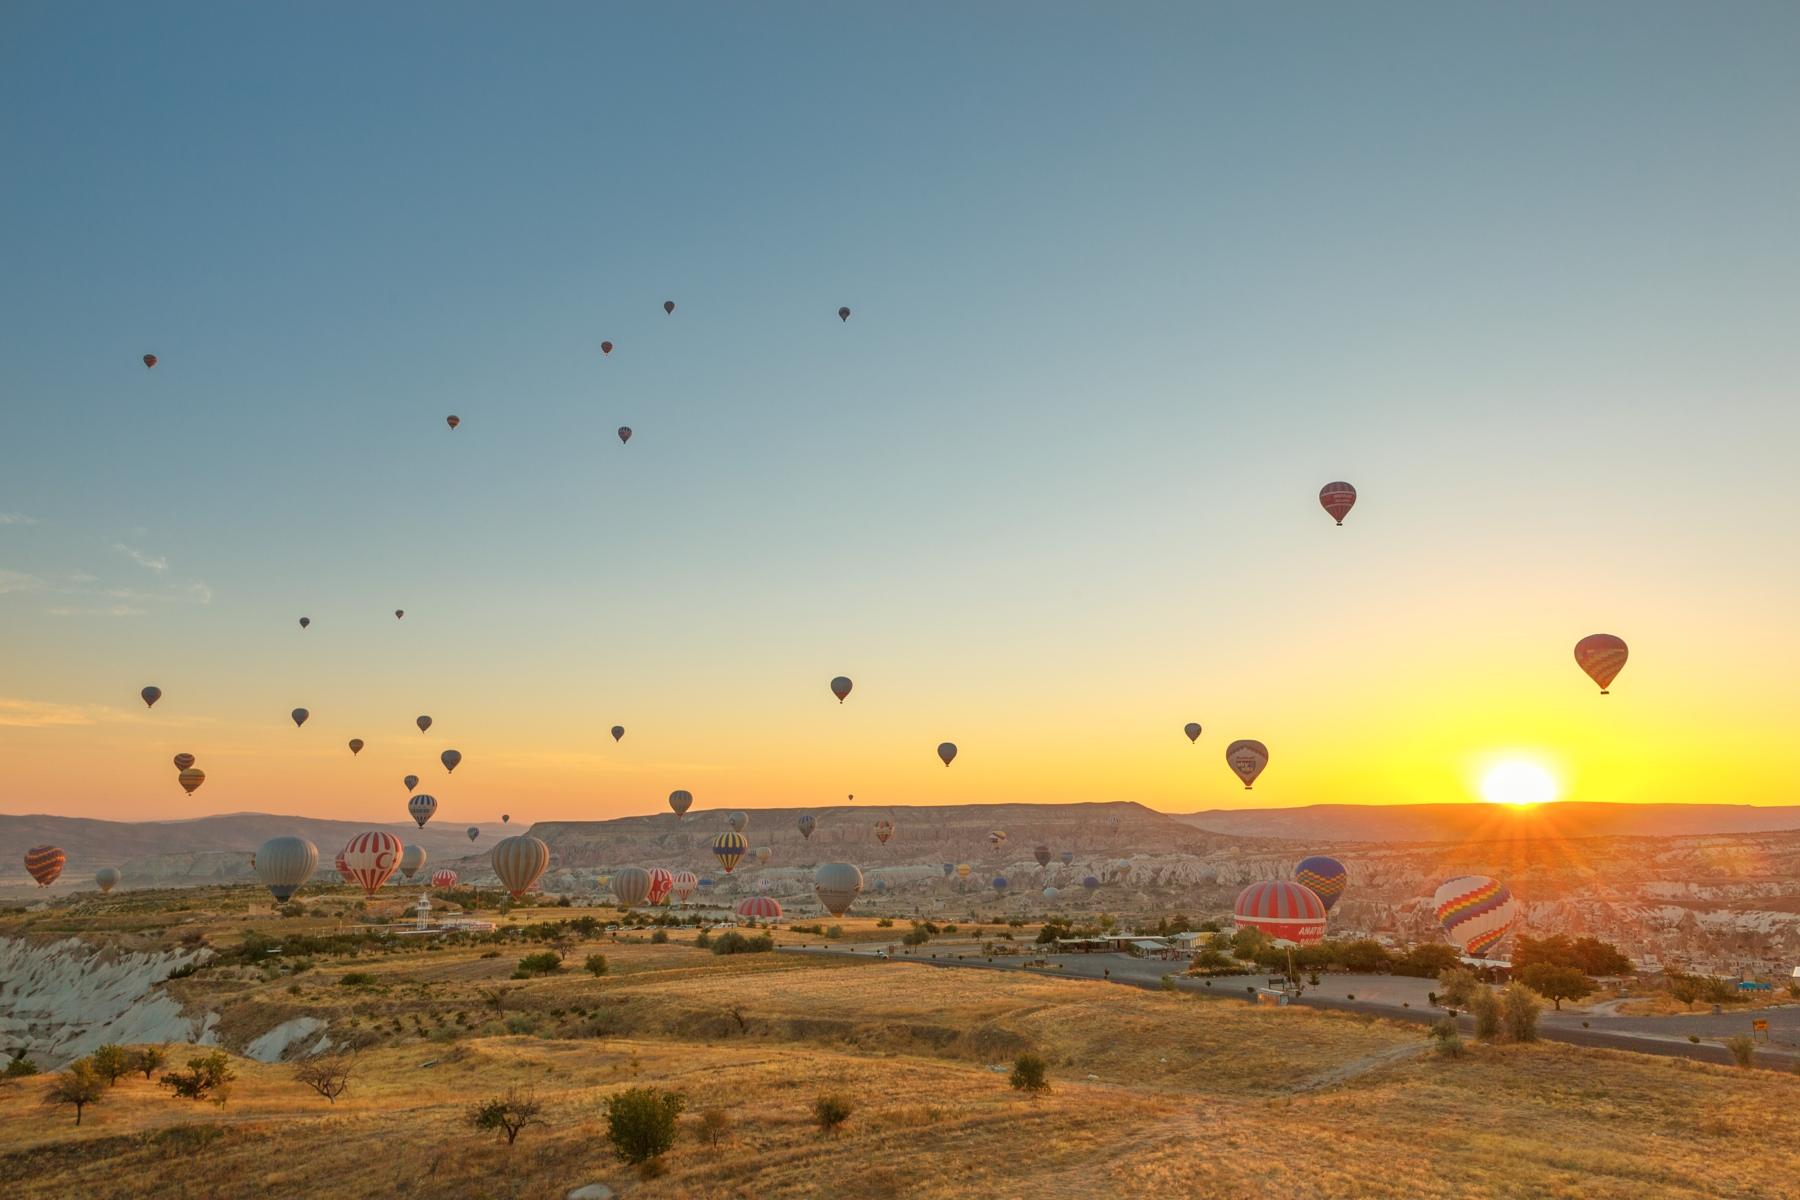 Fairy Tale World of Colorful Hot Air Balloons up in the Sky- Canon